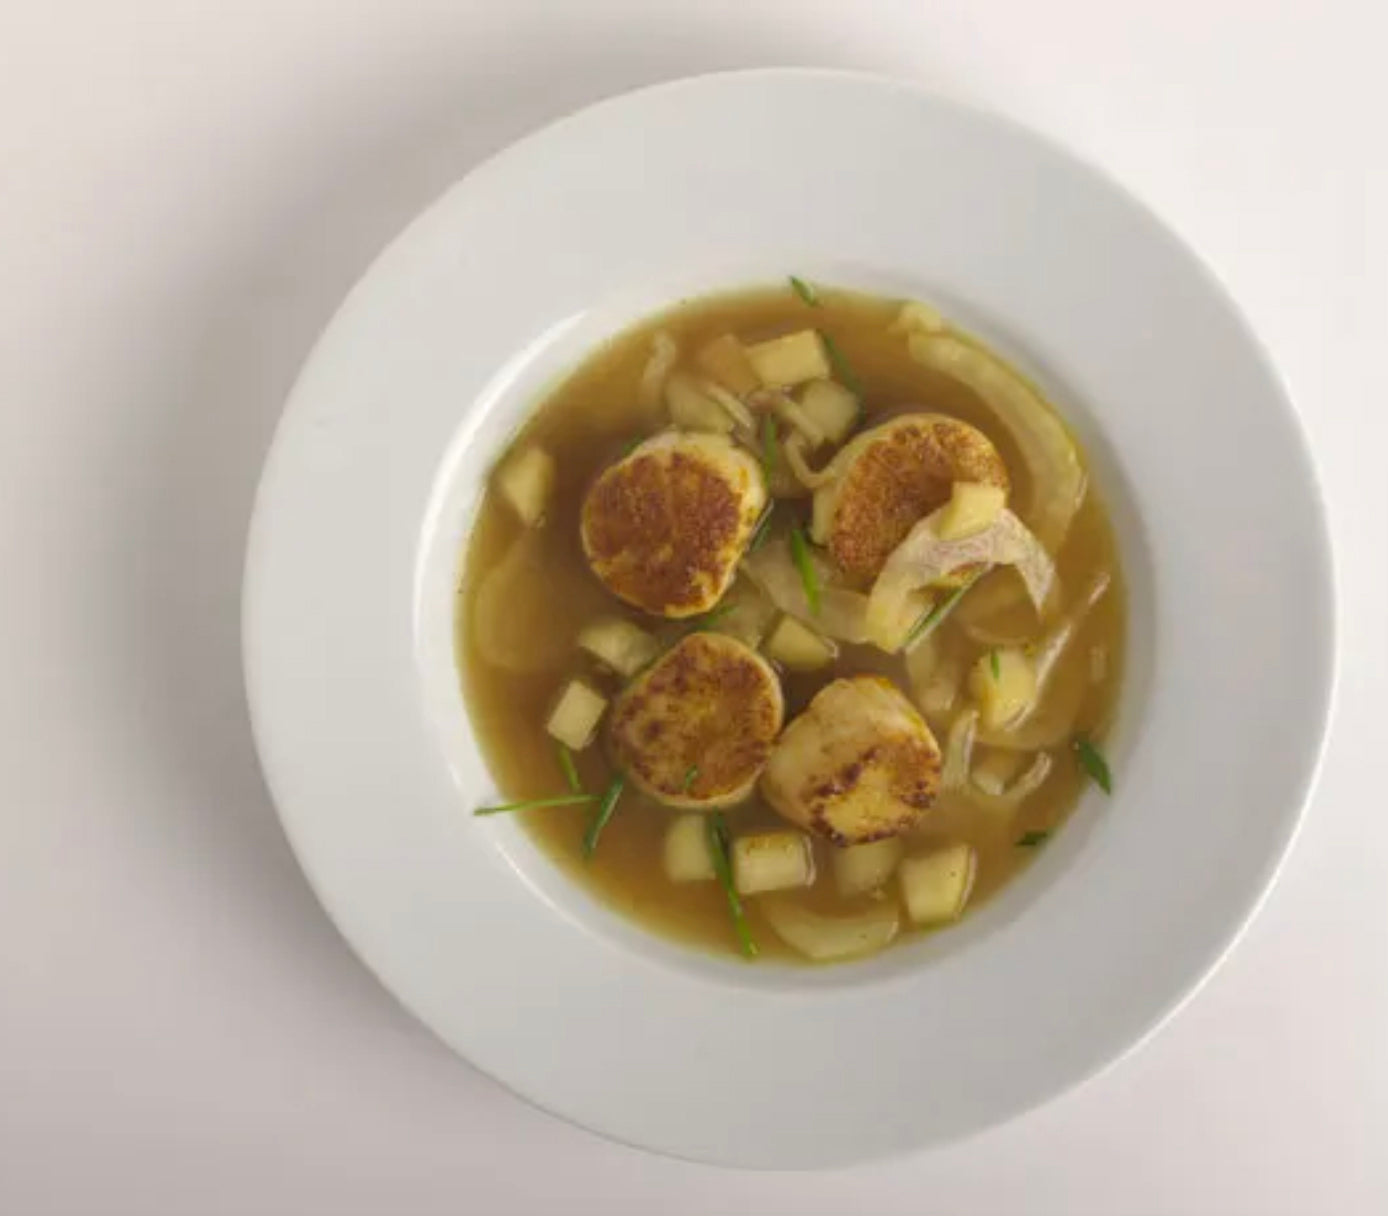 Curry-Dusted Scallops with Fennel-Apple Broth